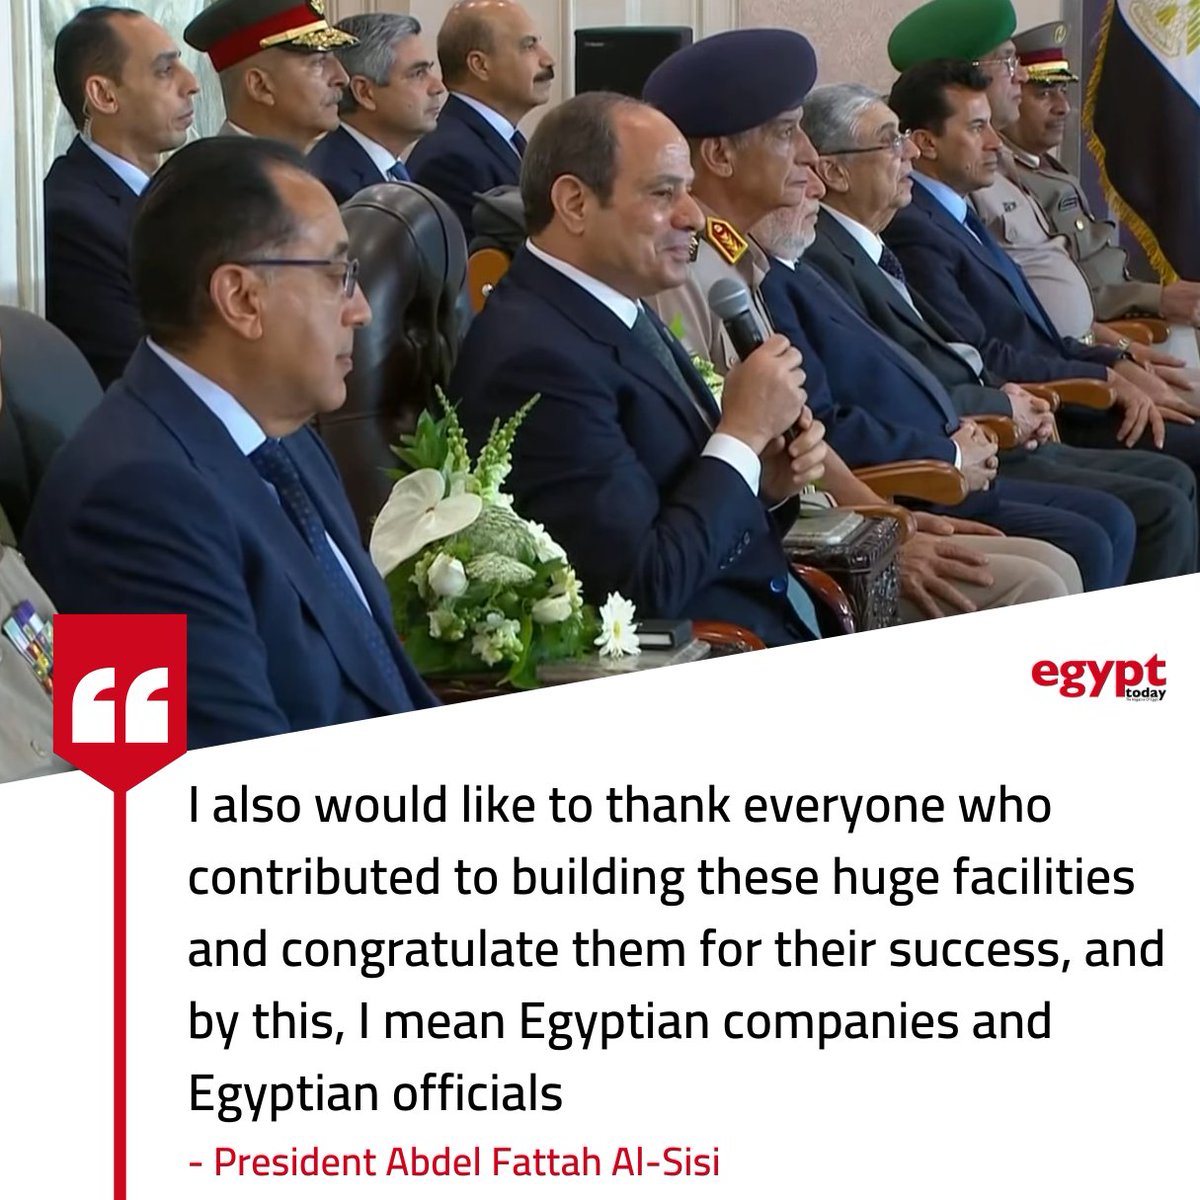 I also would like to thank everyone who contributed to building these huge facilities and congratulate them for their success, and by this, I mean Egyptian companies and Egyptian officials, President Sisi said 🇪🇬 

#Egypt #AMEC2024| #المتحدة_للرياضة #الفروسية #السيسي #تحيا_مصر